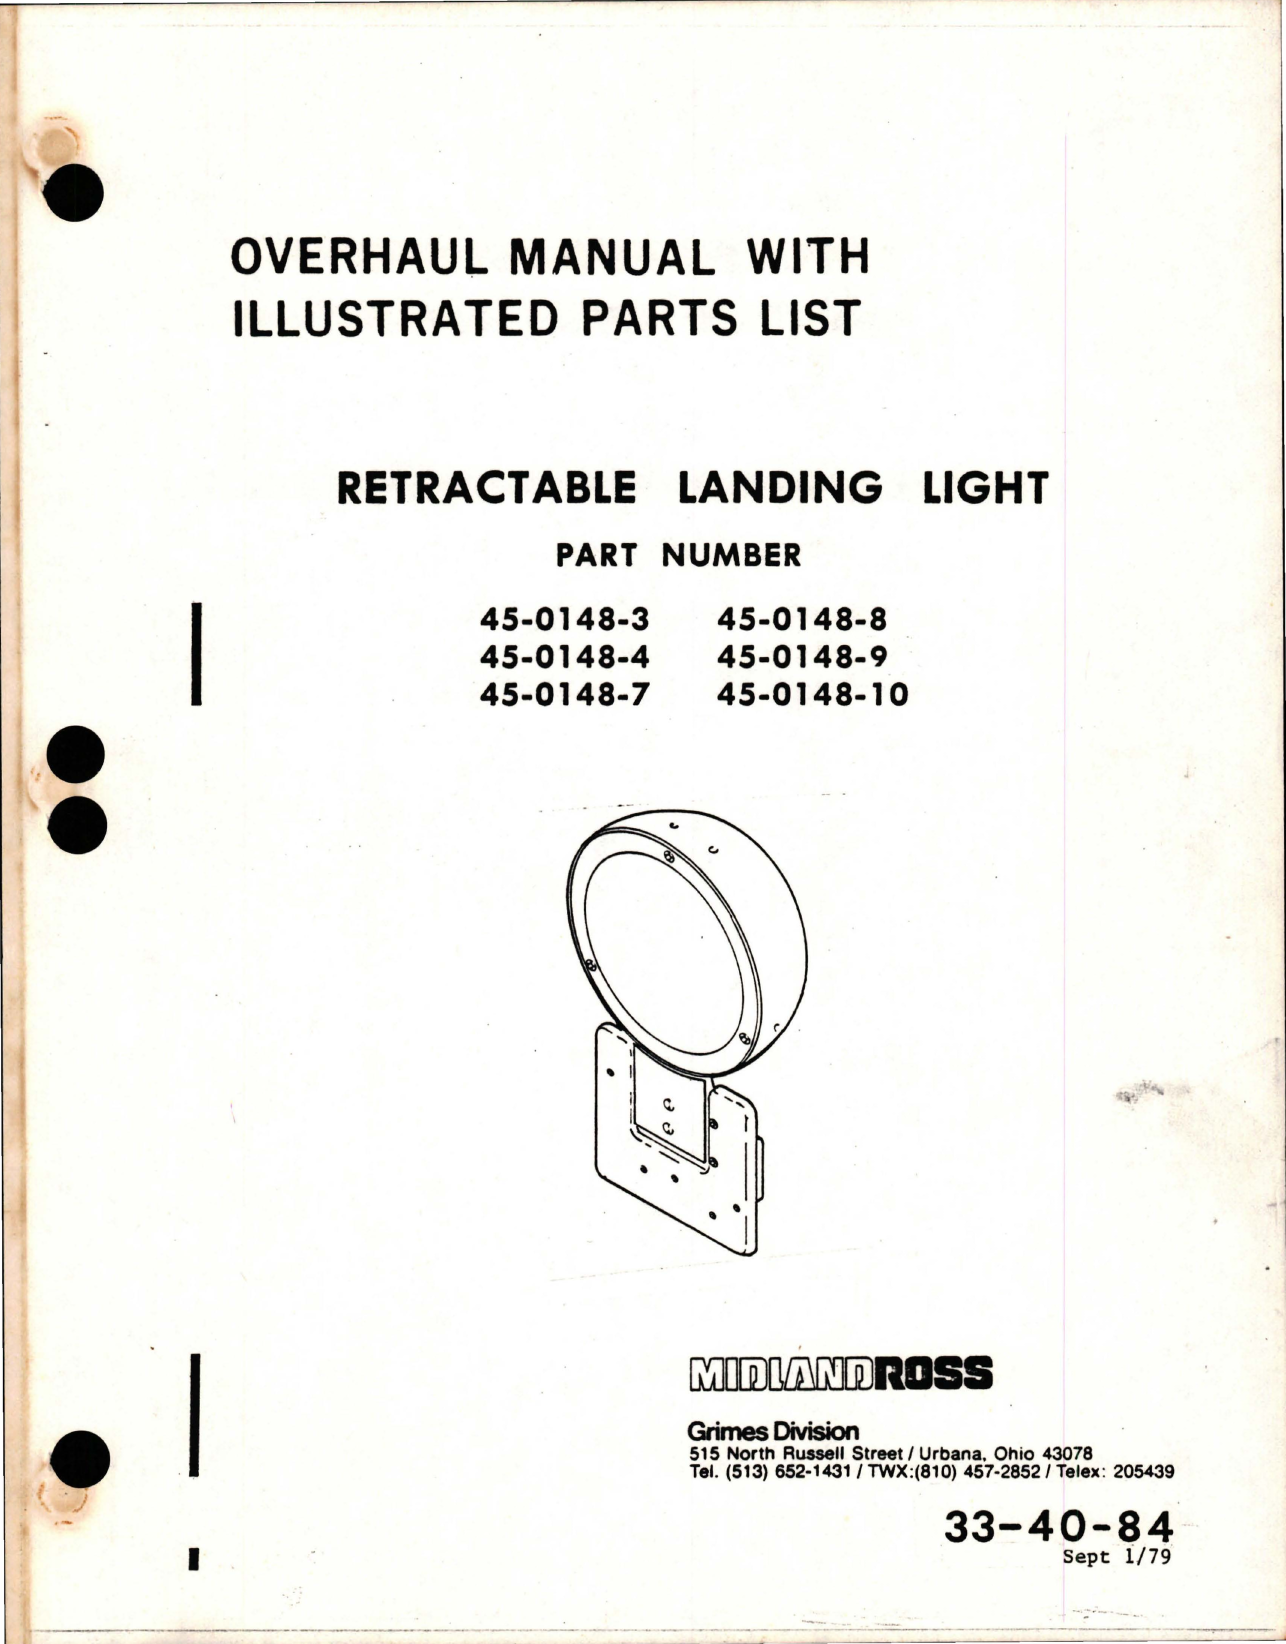 Sample page 1 from AirCorps Library document: Overhaul Manual with Illustrated Parts List for Retractable Landing Light